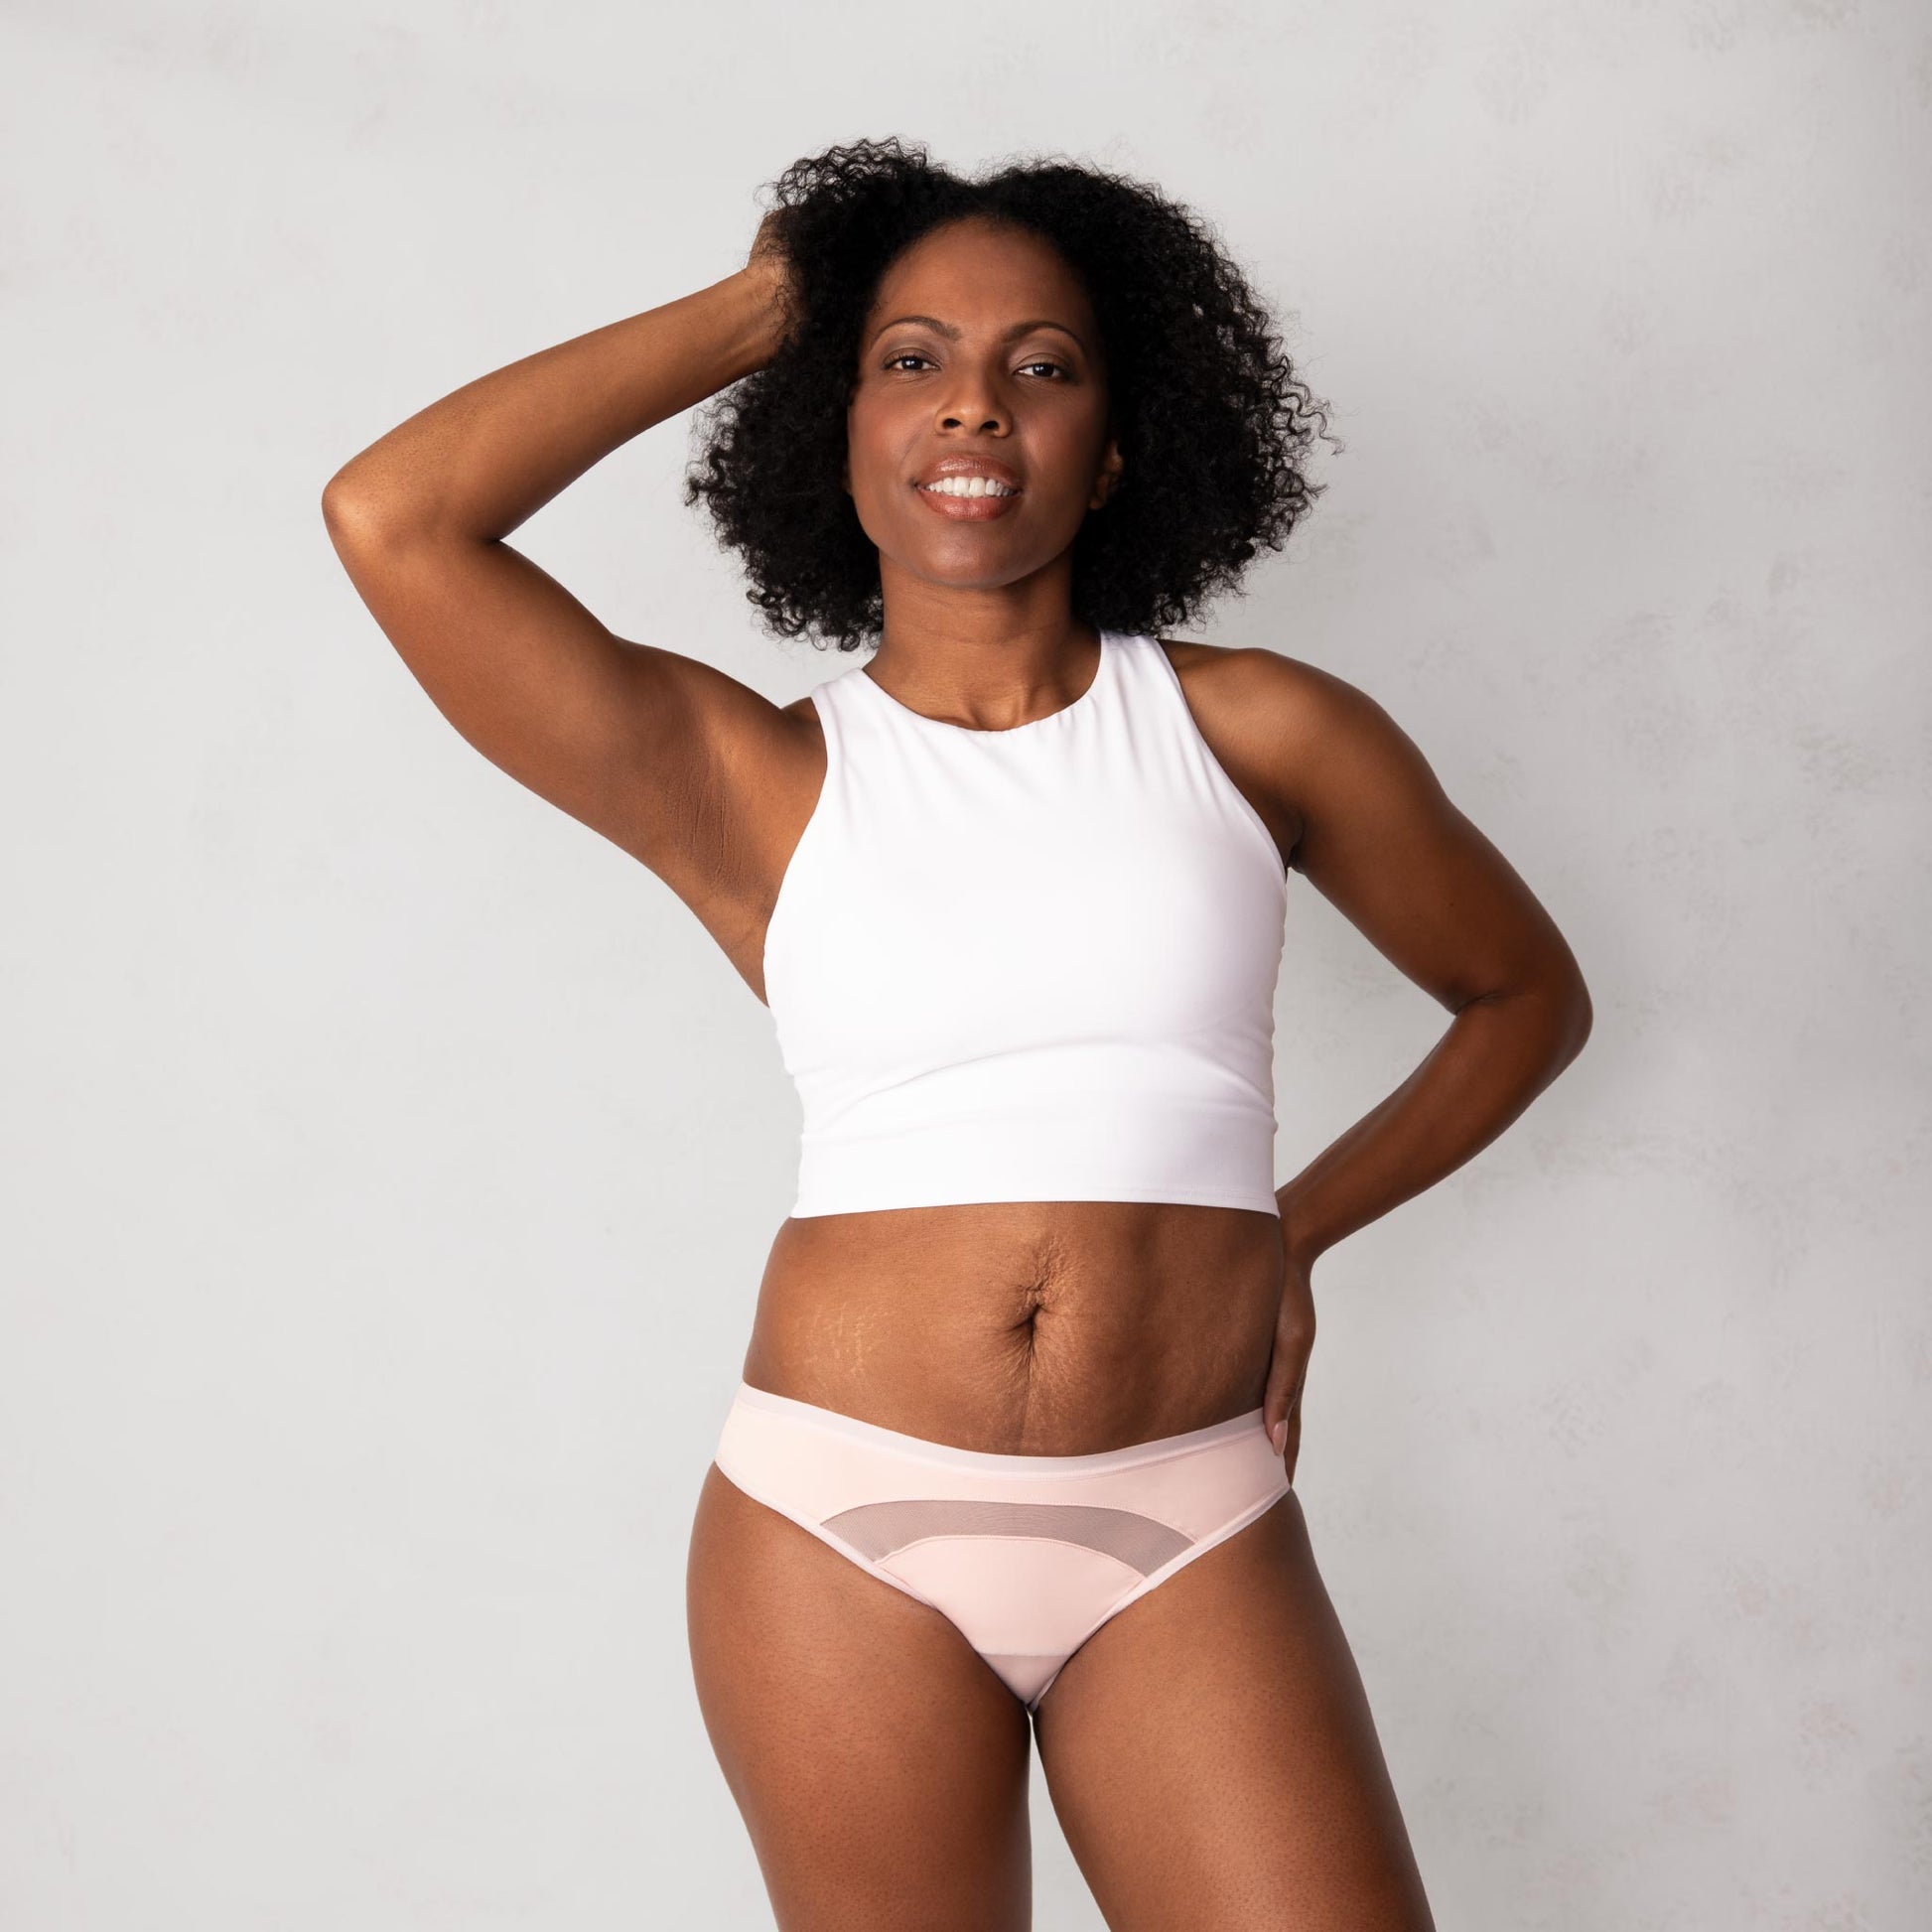 saalt Reusable Period Underwear - Comfortable, Thin, and Keeps You Dry from  All Leaks(Comfort Bikini, Medium, Volcanic Black) at  Women's  Clothing store